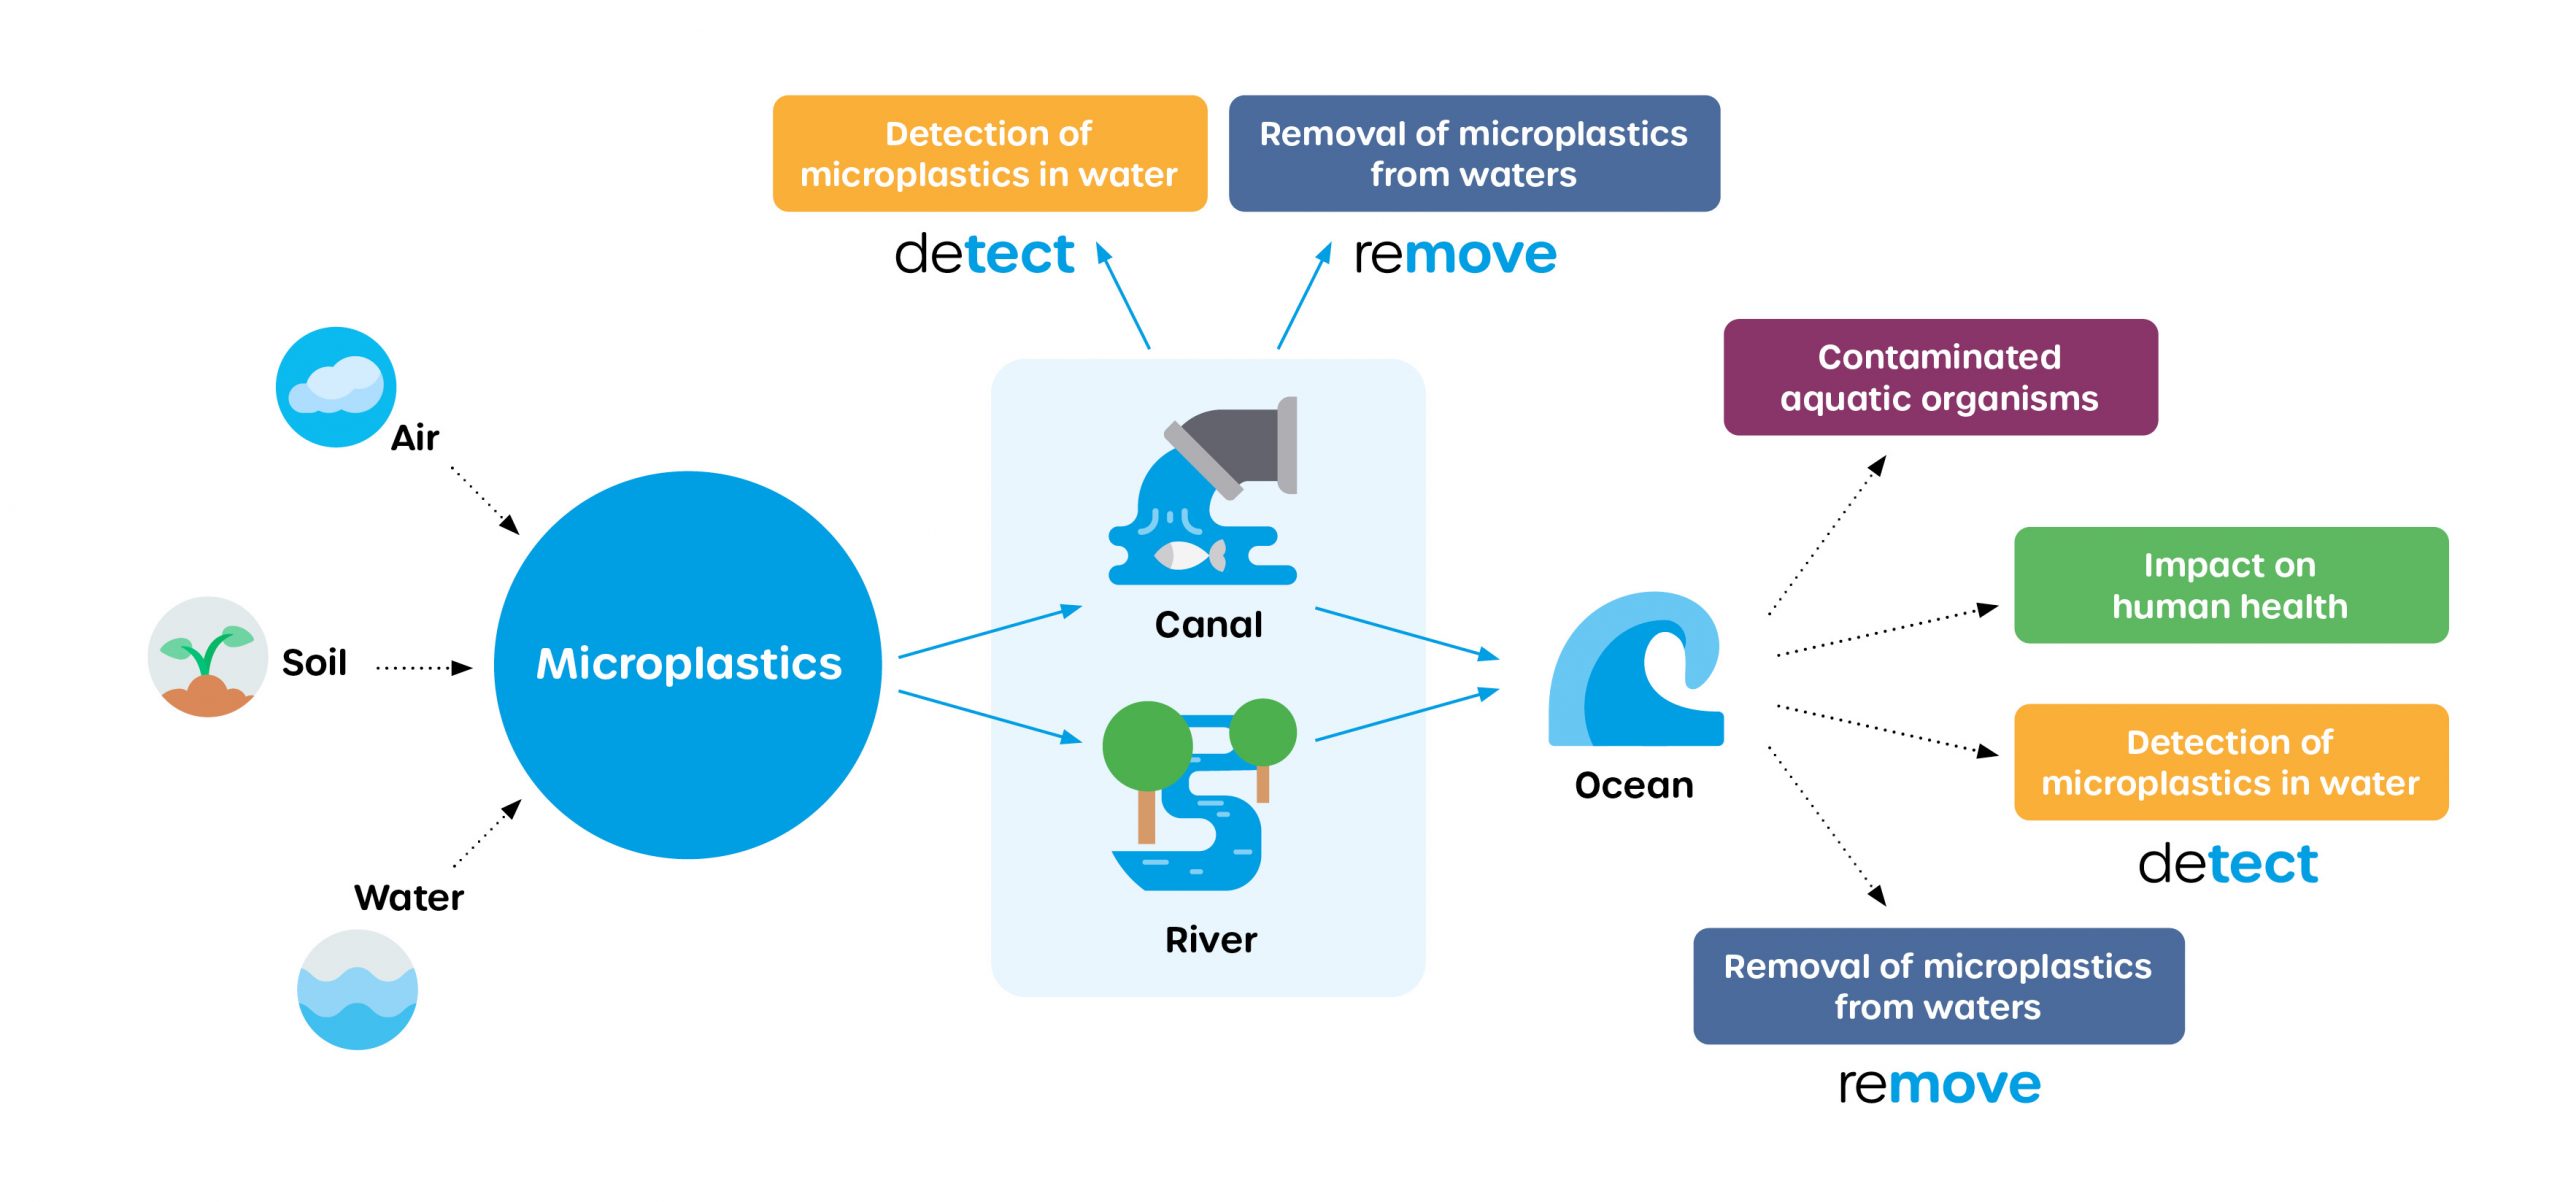 Overview of Wasser 3.0’s activities and approach for water without microplastics  © Wasser  3.0.